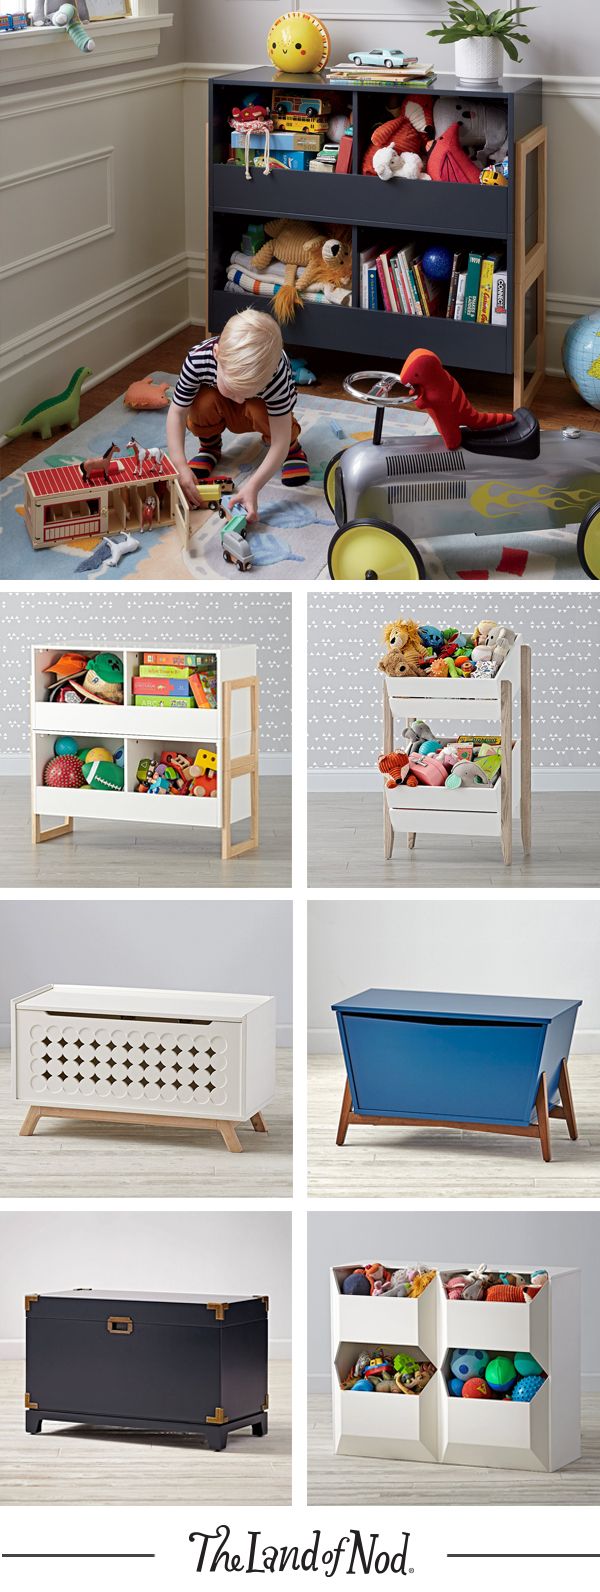 What type of kids furniture clears up any mess? The answer is a toy box! It’s the perfect storage option for holding toys and all their essentials. The Land of Nod’s lineup of colorful toy boxes will feel right at home in a kids bedroom or even a playroom. Plus, an upholstered bench is always a stylish option. They blend the line between fashion and function, and can be used in any shared space.